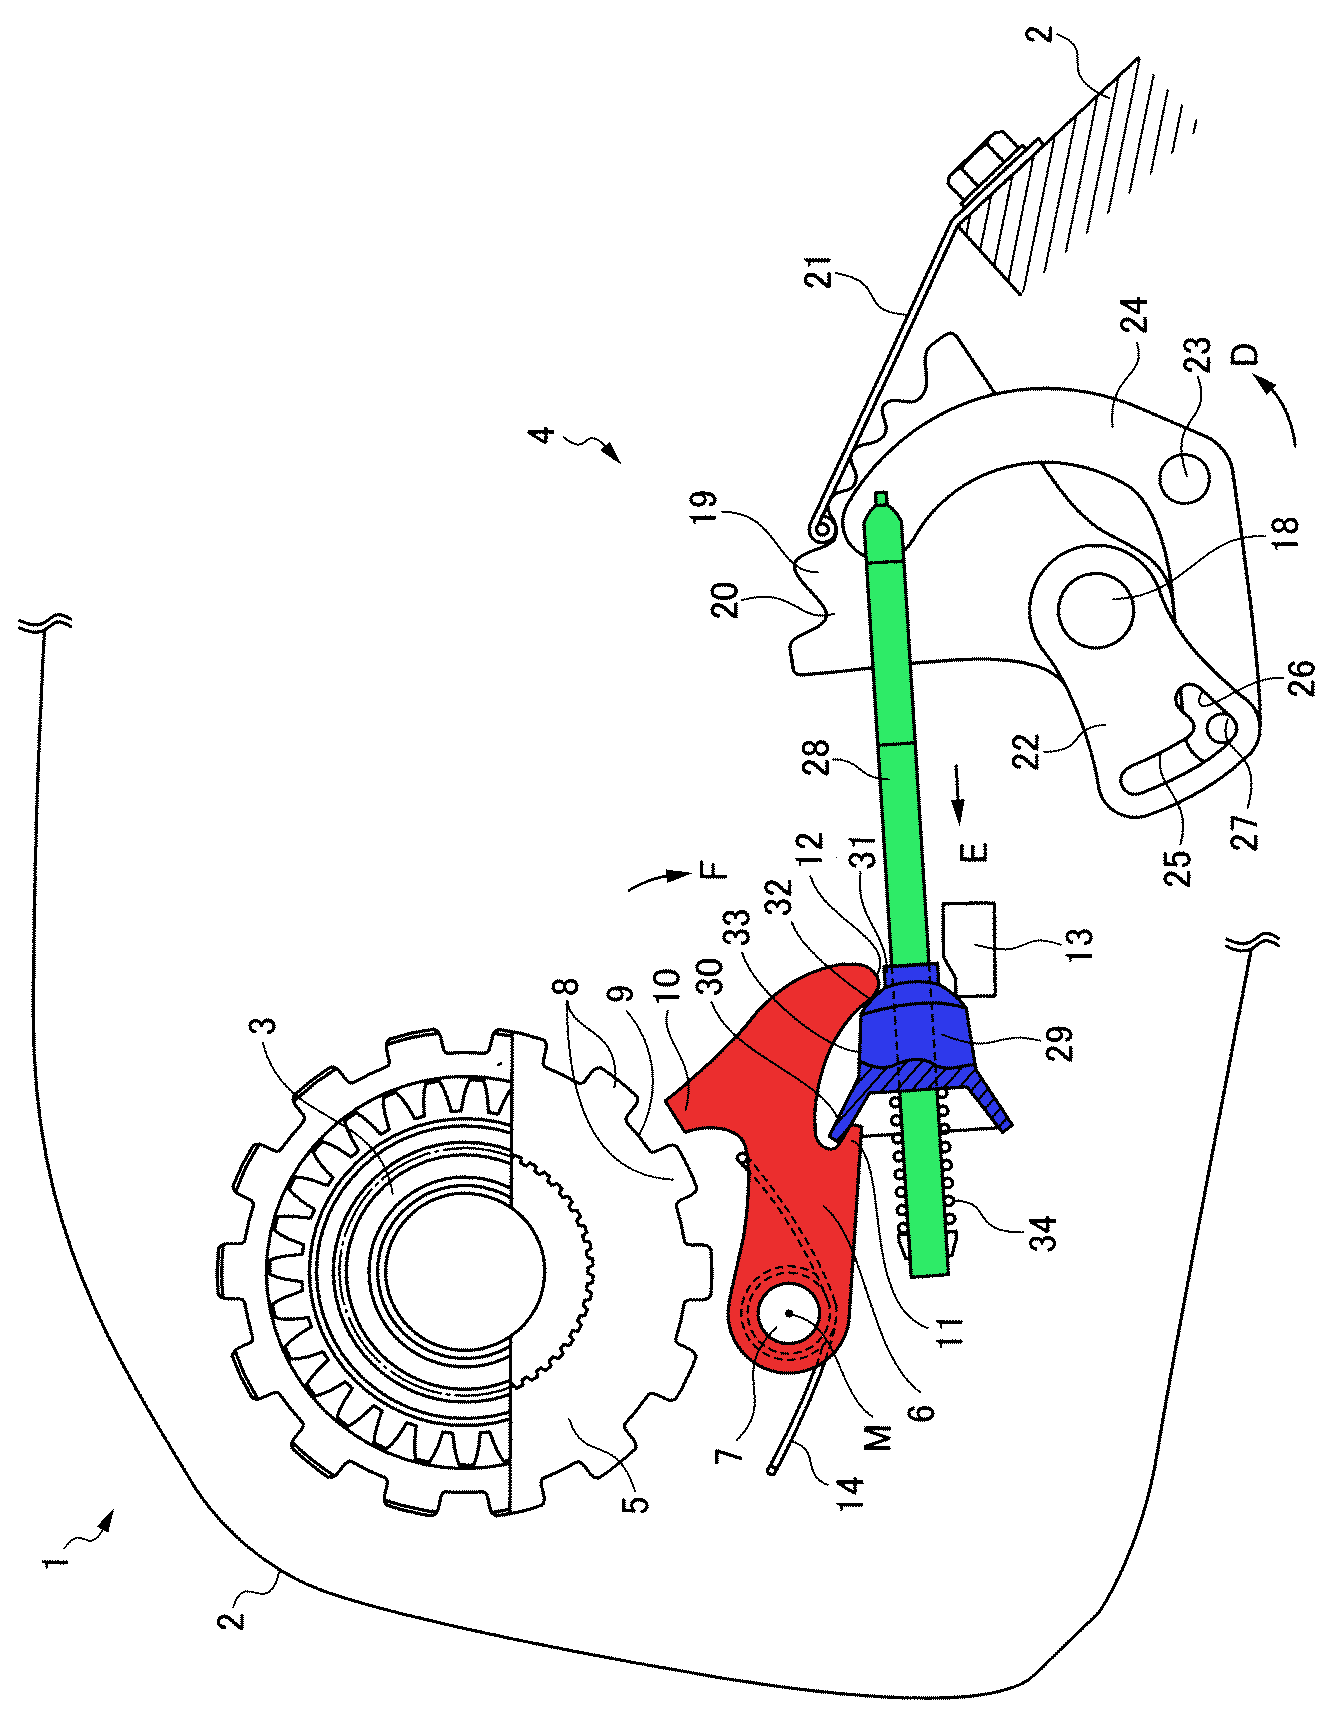 A drawing of a parking pawl mechanism from a Suzuki patent filing. The parking pawl is shown in red and is designed to engage with the cogged "parking gear" to lock the transmission. It's moved by the wedge (blue) and parking rod (green). Resistance between the wedge and rod in the Jatco nine-speed can inhibit the free movement of the wedge and the pawl, preventing the pawl from engaging properly. <em>USPTO</em>